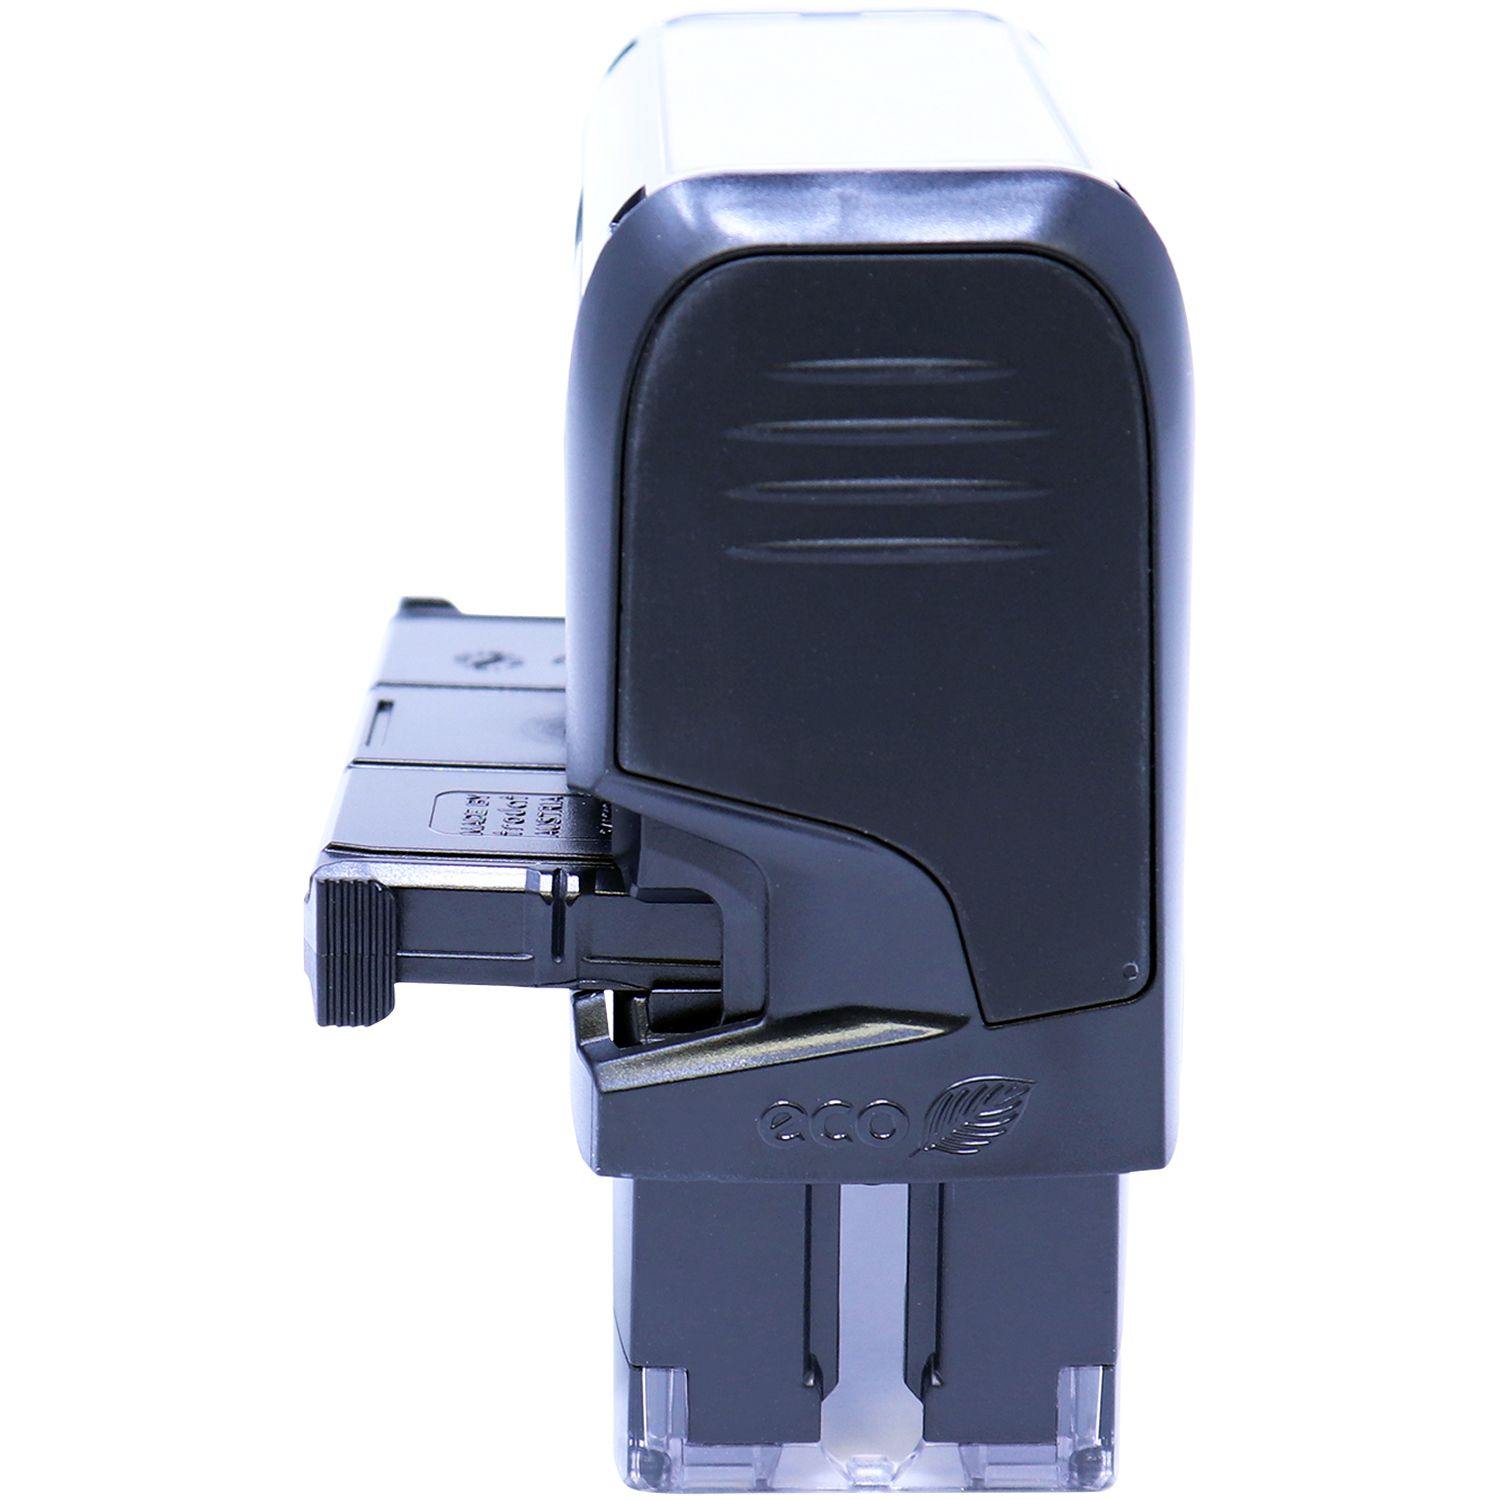 Self Inking Void Stamp - Engineer Seal Stamps - Brand_Trodat, Impression Size_Small, Stamp Type_Self-Inking Stamp, Type of Use_Office